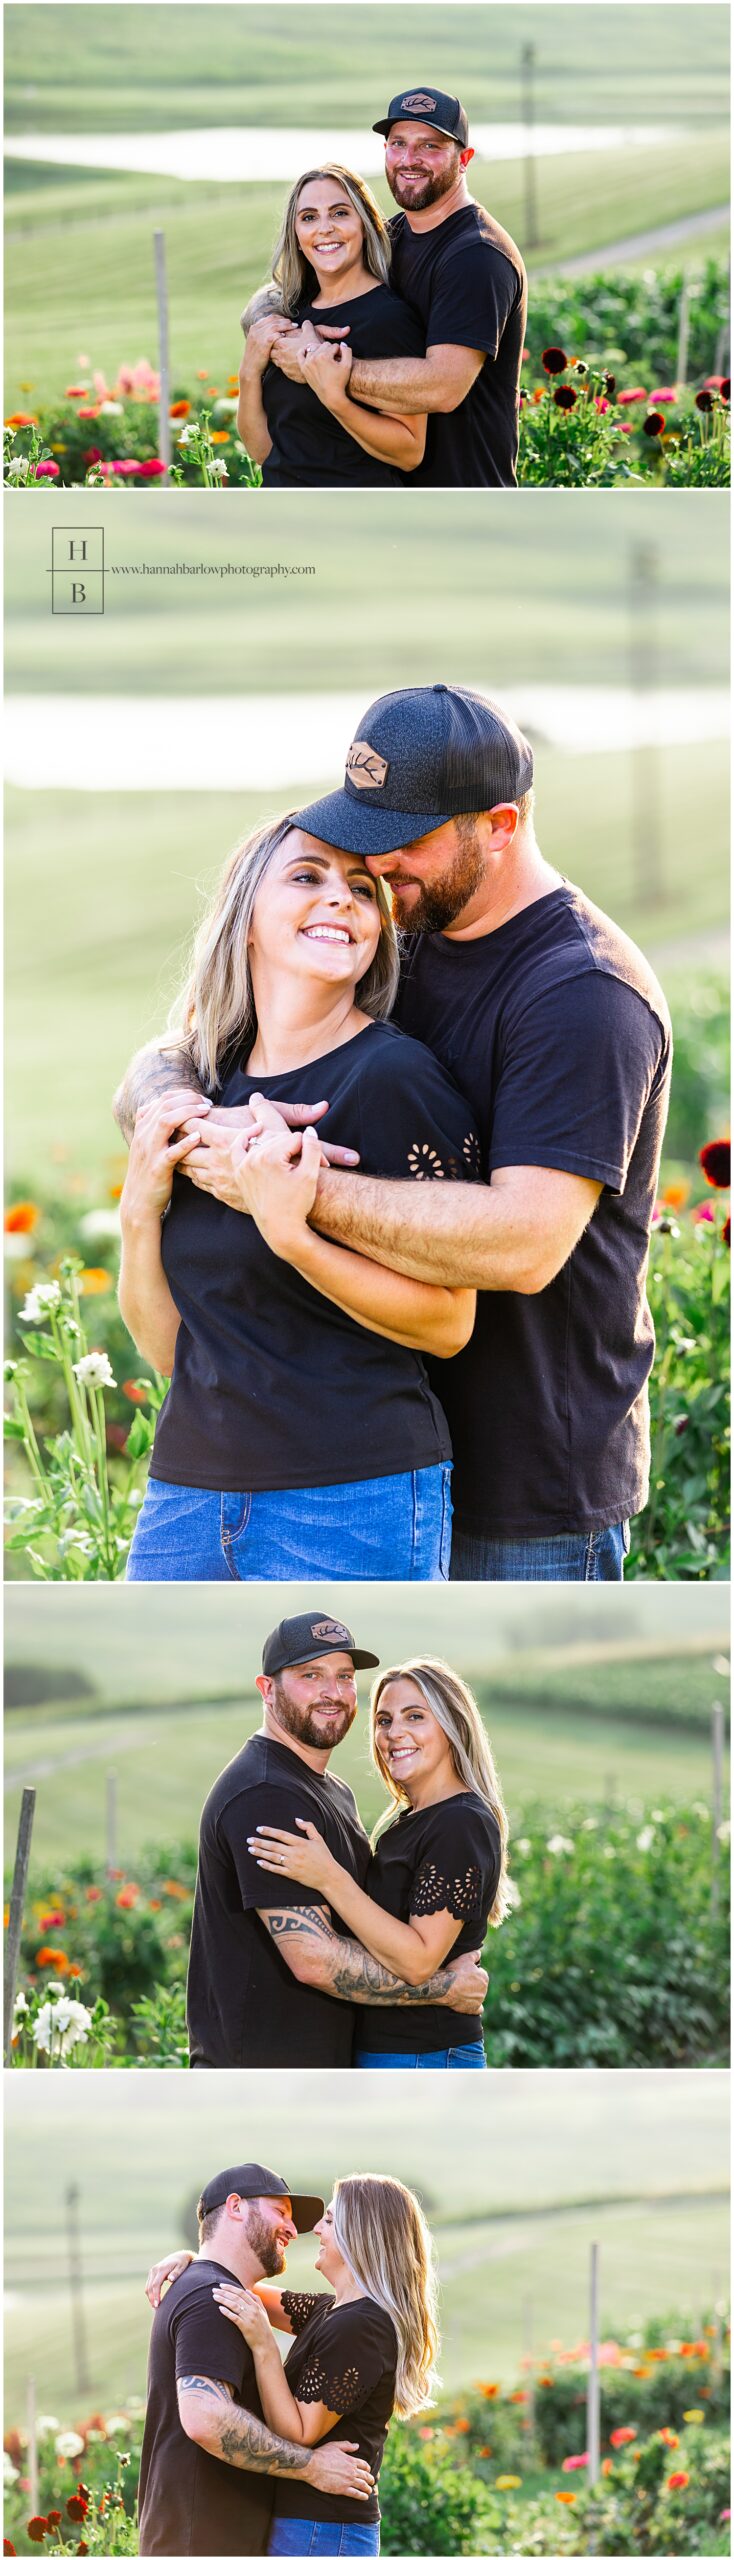 Couple poses in flower field wearing black for engagement photos.